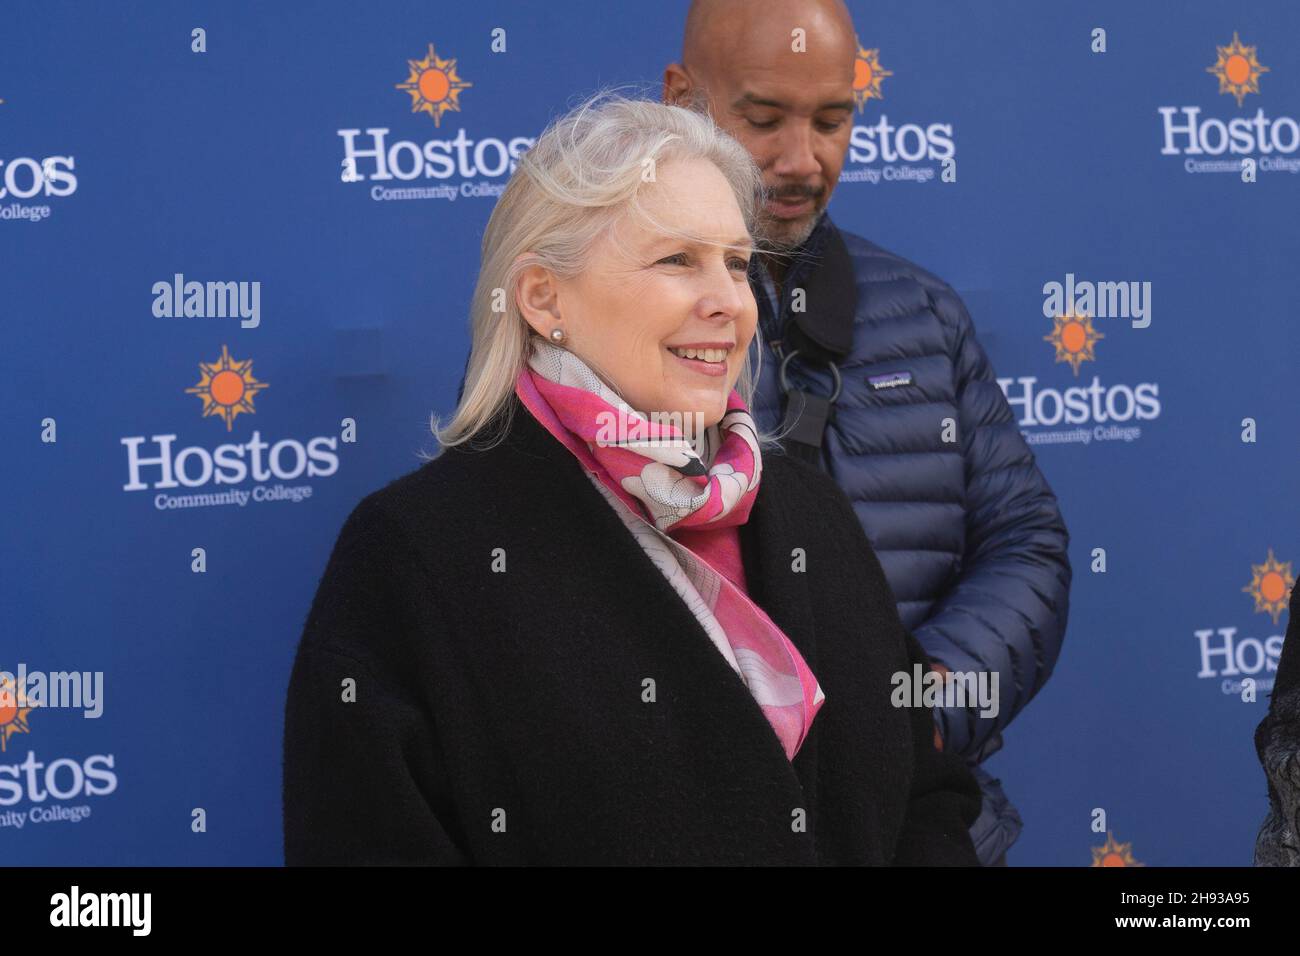 New York, USA. 03rd Dec, 2021. U.S. Senator Kirsten Gillibrand announces her legislation Enhance Access to SNAP Act in front of Hostos Community College. Legislation would expand Supplemental Nutrition Assistance Program (SNAP) benefit eligibility to all college students attending 2 and 4-year universities part-time or more who meet traditional SNAP income and other eligibility requirements. Senator was joined by CUNY Chancellor Felix Matos Rodriguez, Bronx Borough President Ruben Diaz Jr., Assembly Member Amanda Septimo, Hostos Community College President Dr. Daisy Cocco De Filippis, Hunger F Stock Photo